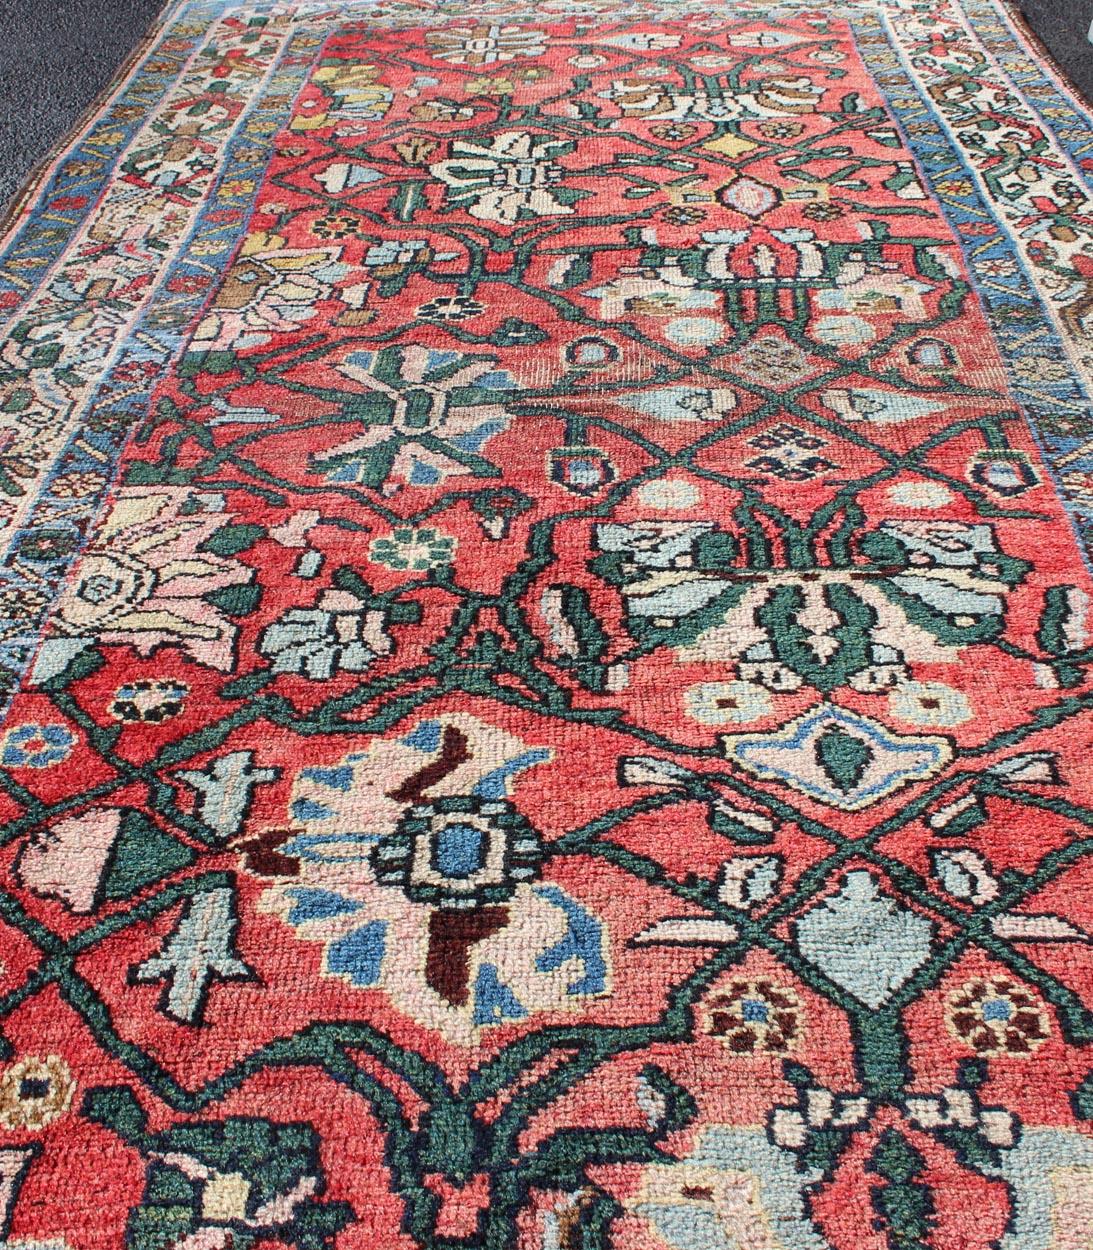 Wool Antique Persian Bidjar Rug with Large Floral Motifs in Soft Red, Green & Blue For Sale